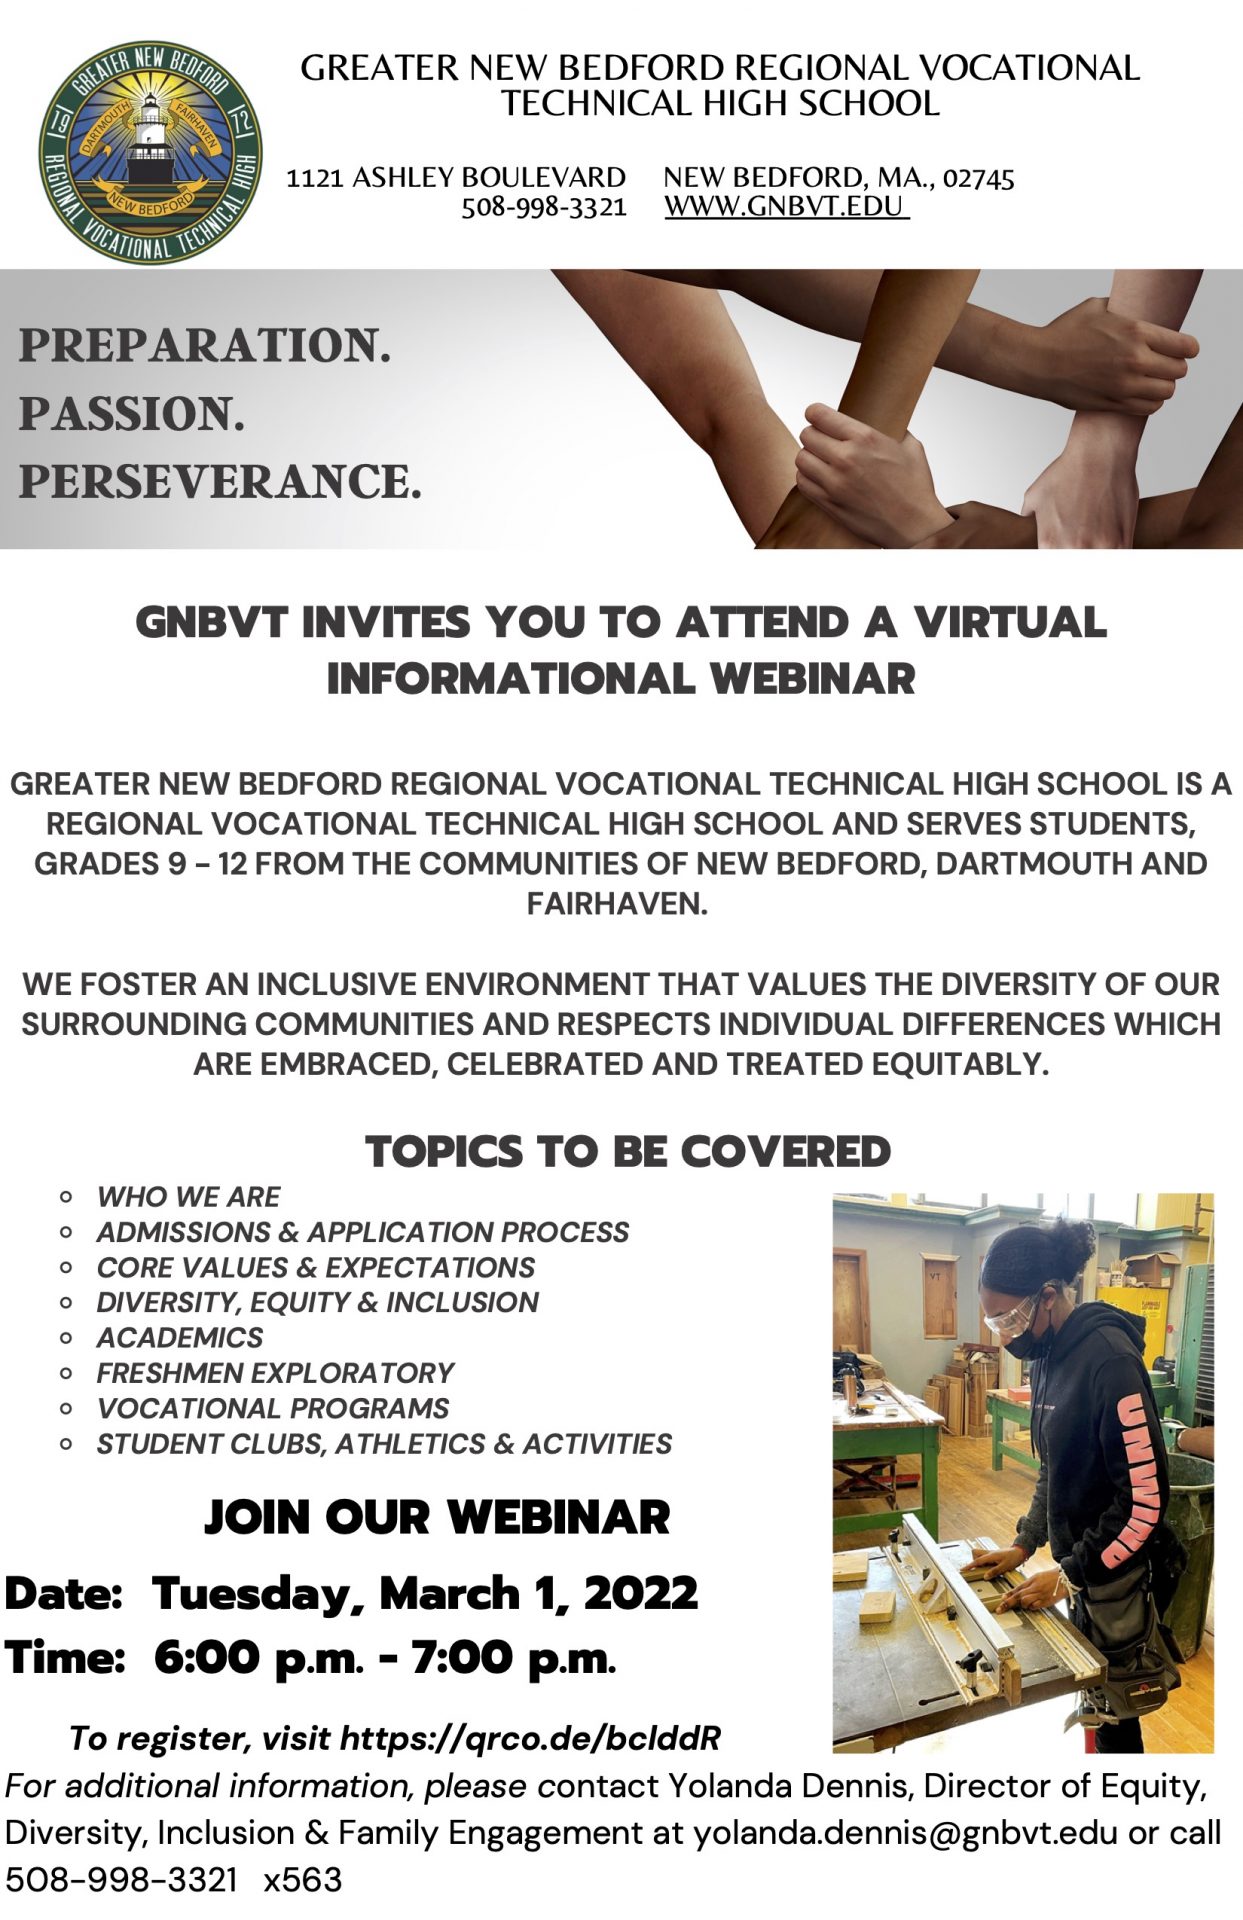 Post for Virtual Information Webinar, click on it for a readable version